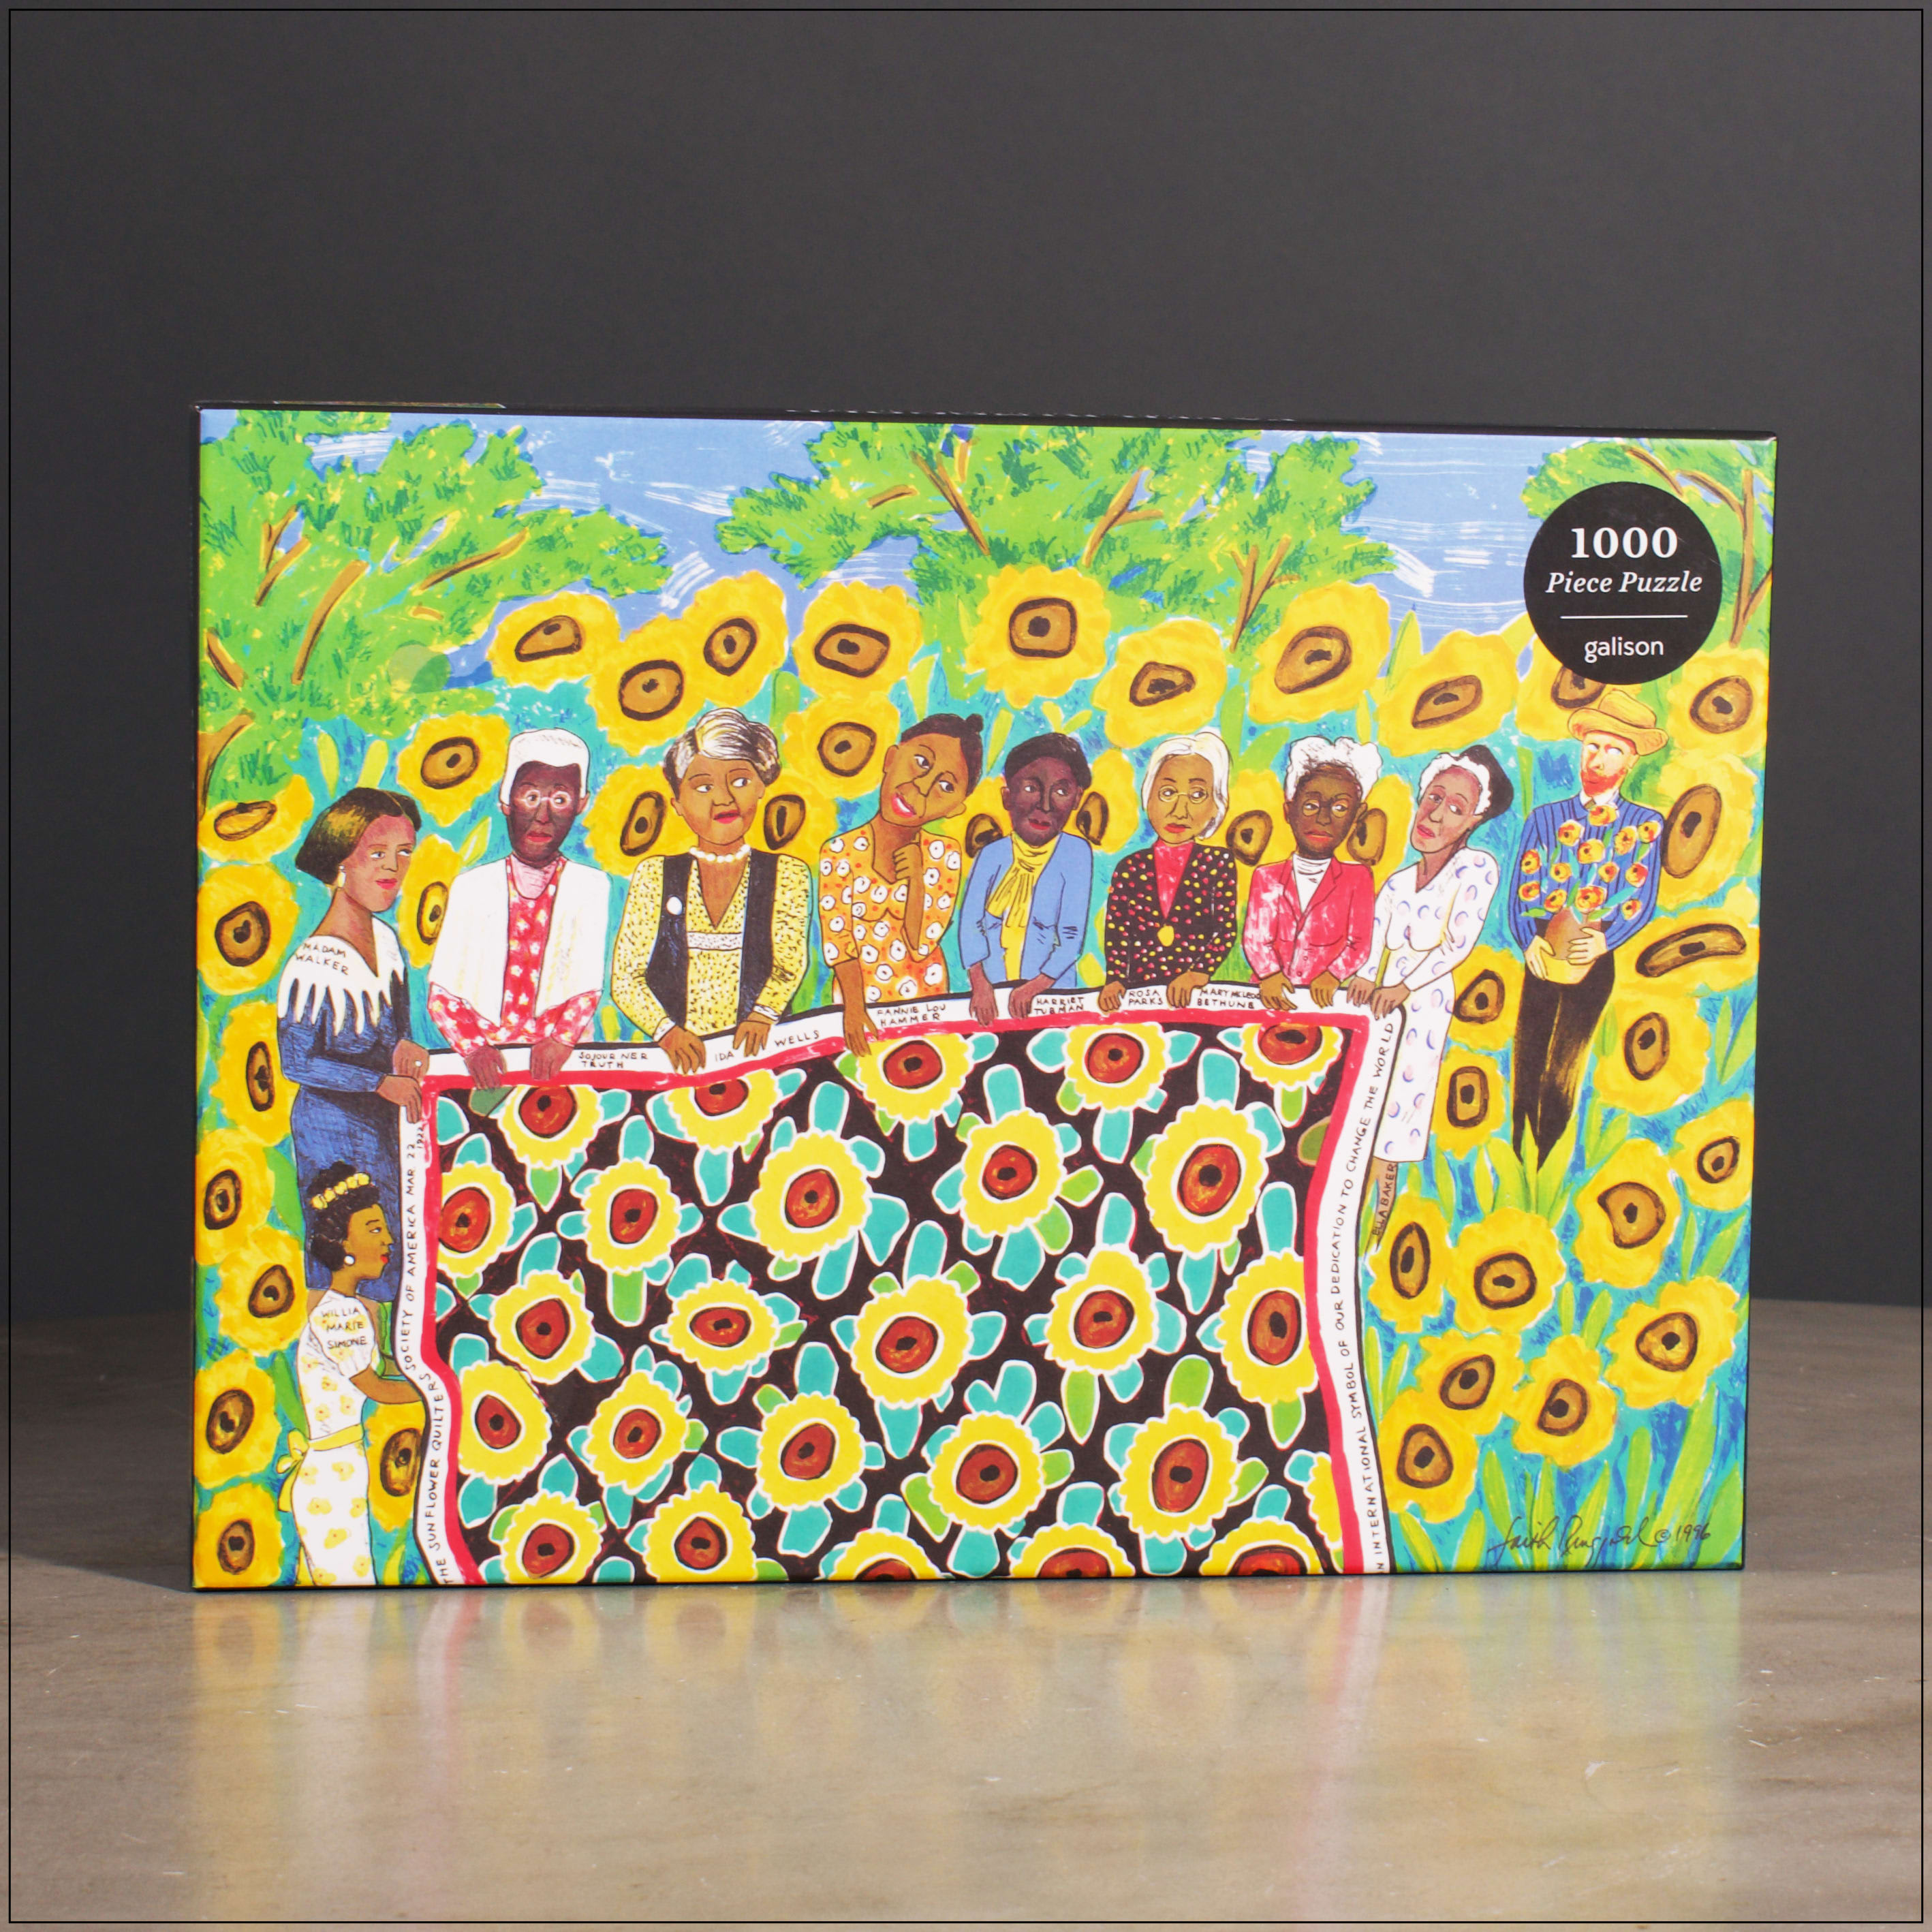 The Sunflower Quilting Bee at Arles 1000 Piece Puzzle - The Faith Ringgold The Sunflower Quilting Bee at Arles 1000 Piece Puzzle from Galison features Ringgold's colorful painting of eight powerful African American women from the past, including Sojourner Truth, Harriet Tubman, Rosa Parks, and more. Born 1930 in Harlem, New York, Ringgold is a painter, mixed media sculptor, performance artist, writer, teacher and lecturer. Through words and text, symbol and metaphor, she acknowledges the contributions of African American women and honors their traditions. Galison puzzles are packaged in matte-finish sturdy boxes, perfect for gifting, reuse, and storage. An insert of the full puzzle image is also included.  - 1000 pieces